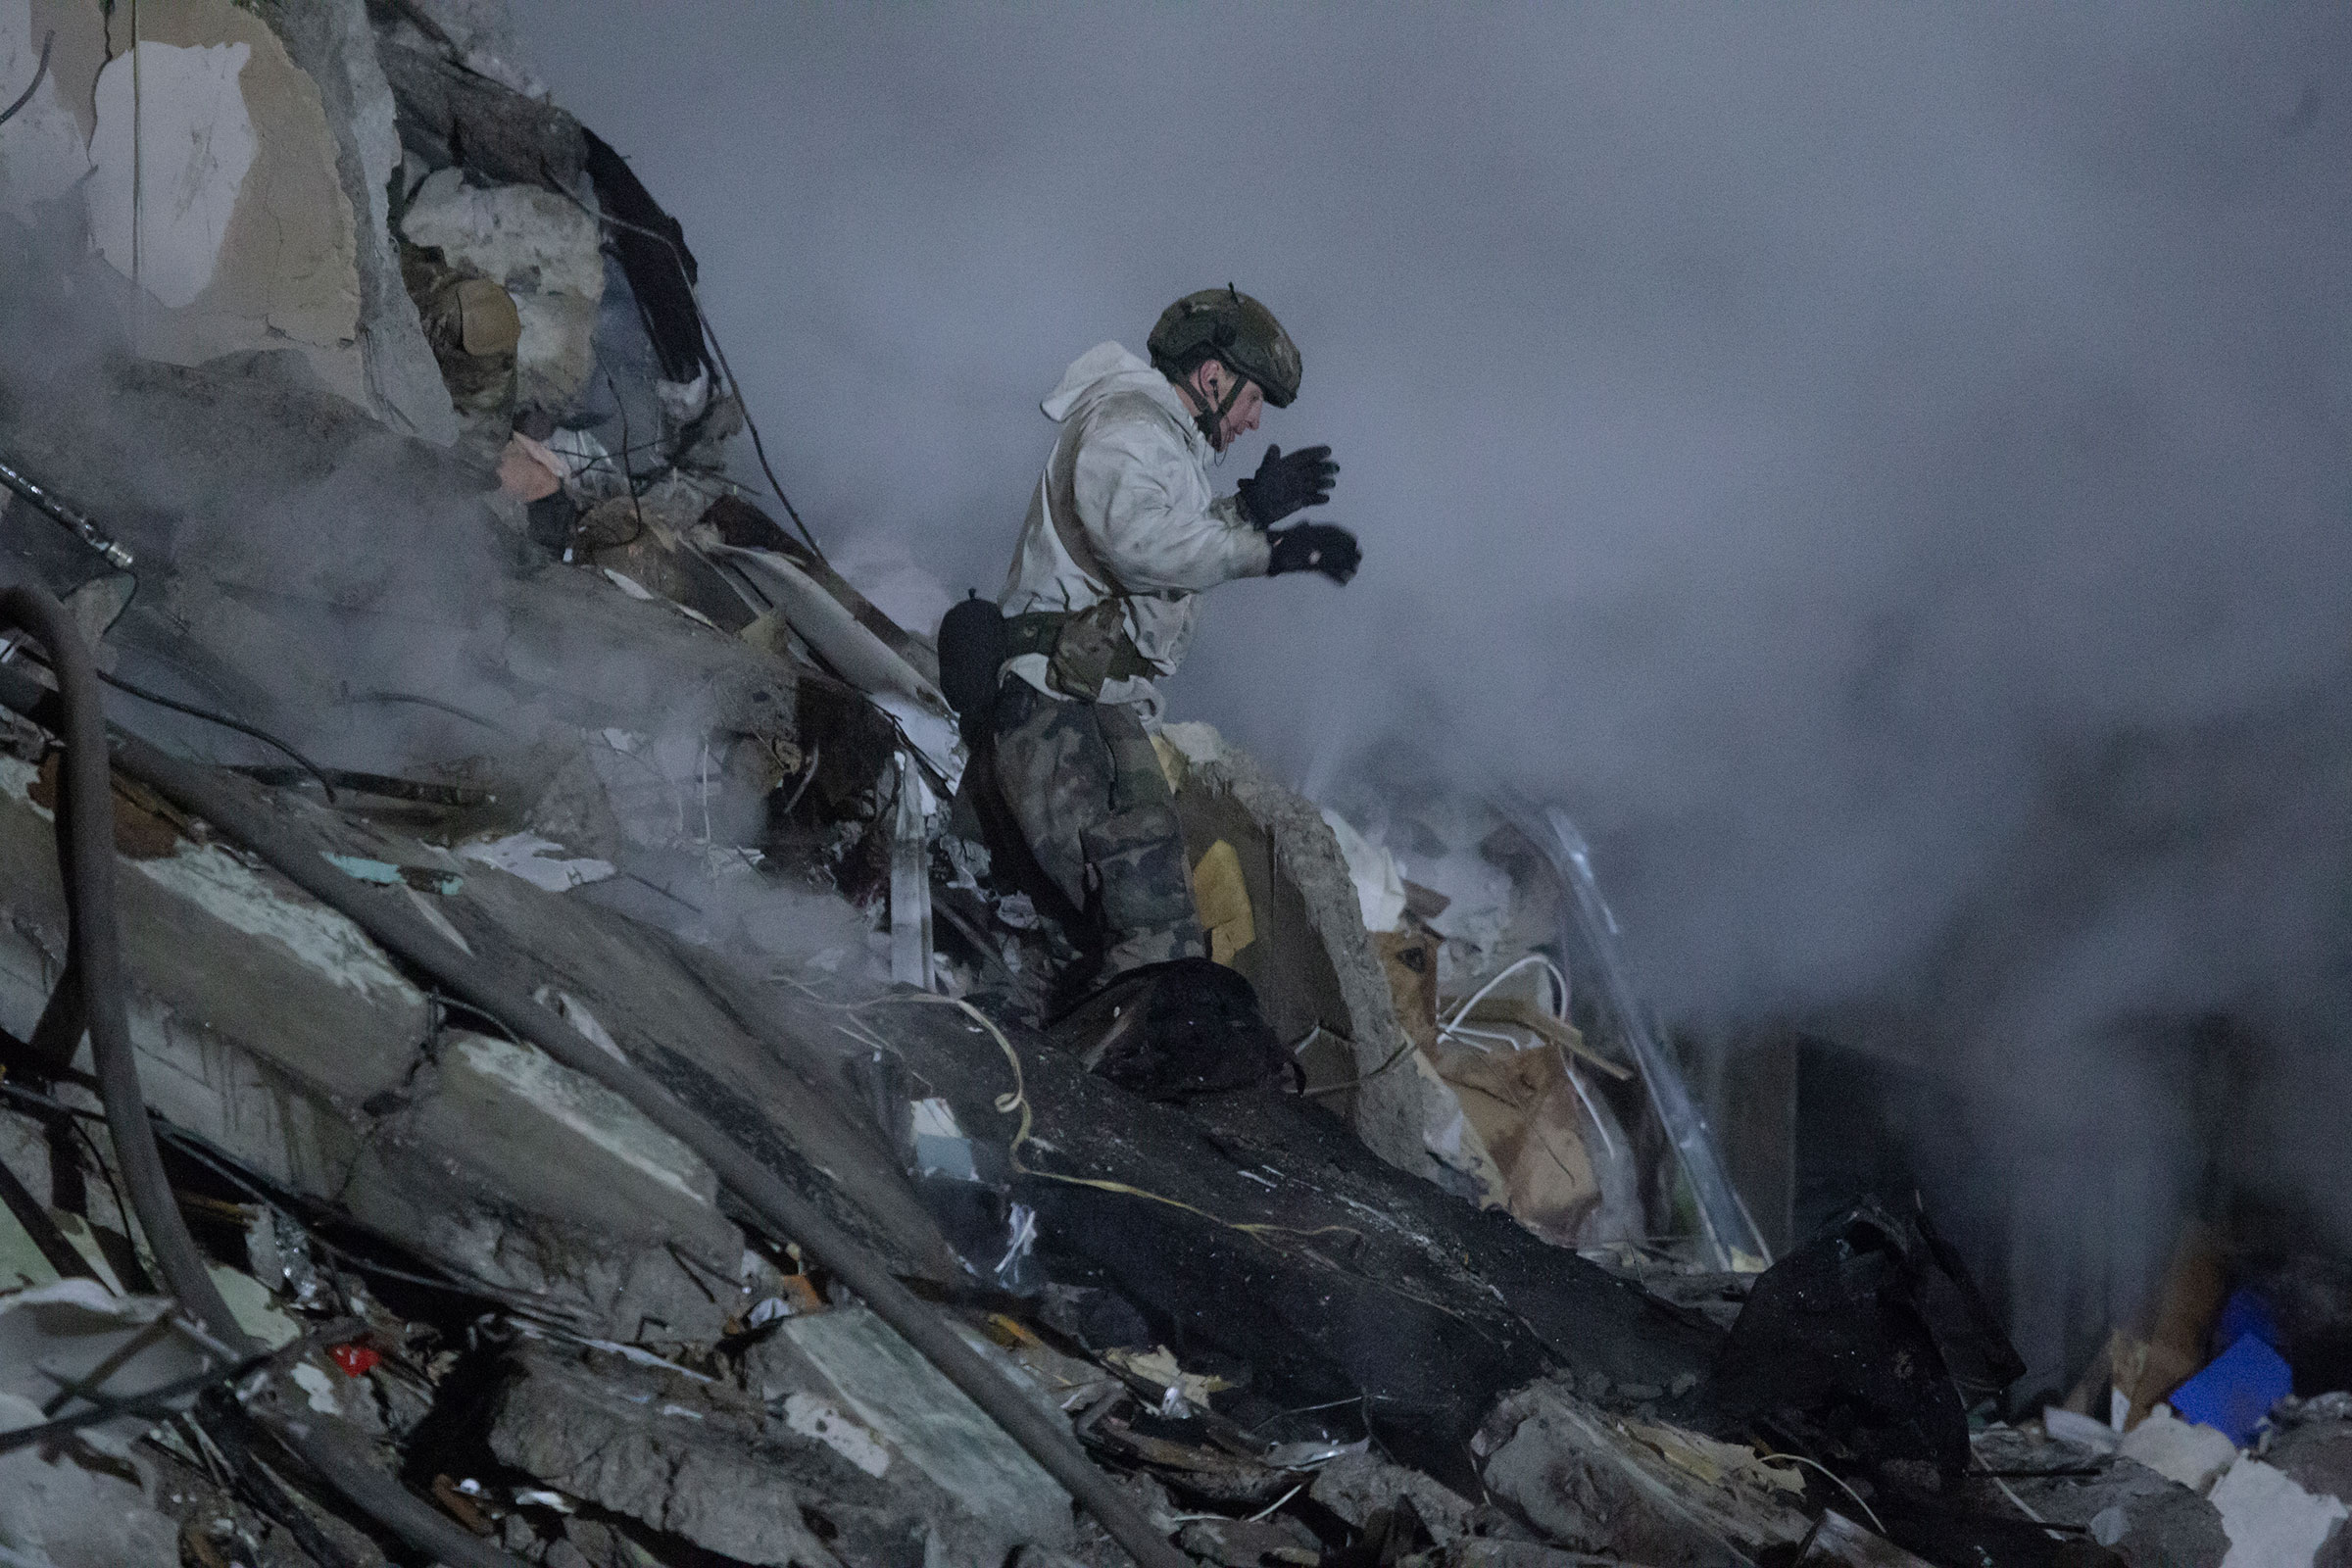 A rescue worker stands amid rubble during search and rescue operations in Dnipro, on Jan. 15. (Yan Dobronosov—Global Images Ukraine/Getty Images)